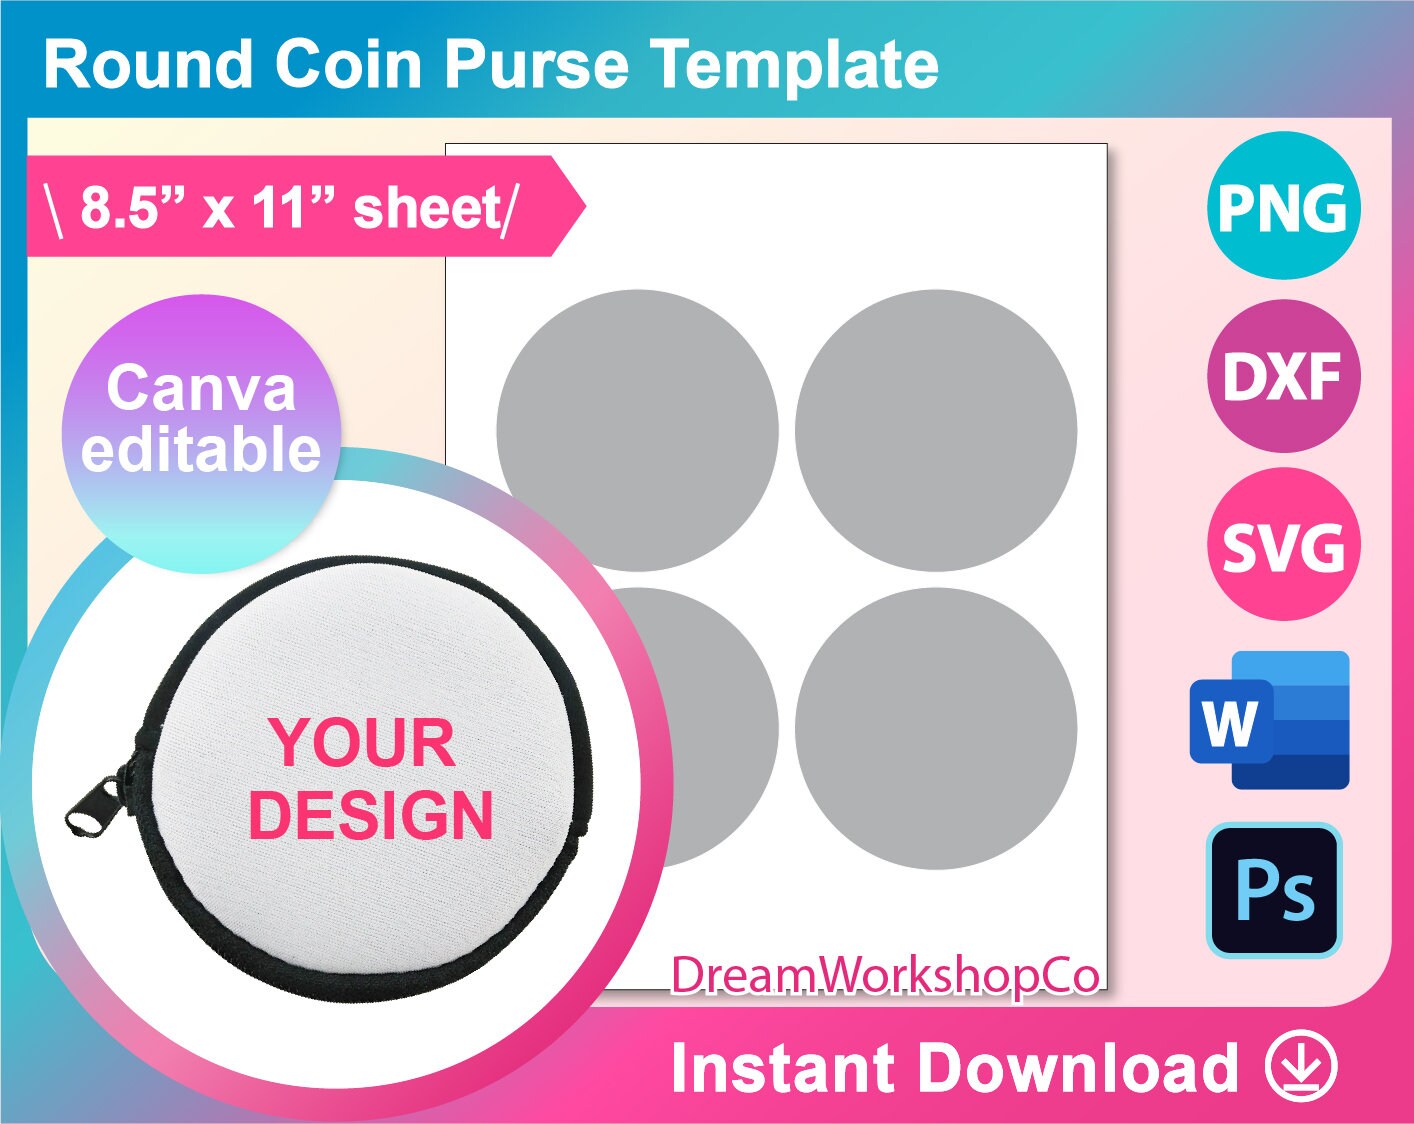 Round Coin Purse Template, Sublimation Template, Bifold Wallet Sublimation,  Canva, SVG, DXF, Ms Word Docx, Png, Psd, 8.5x11 Sheet - Etsy